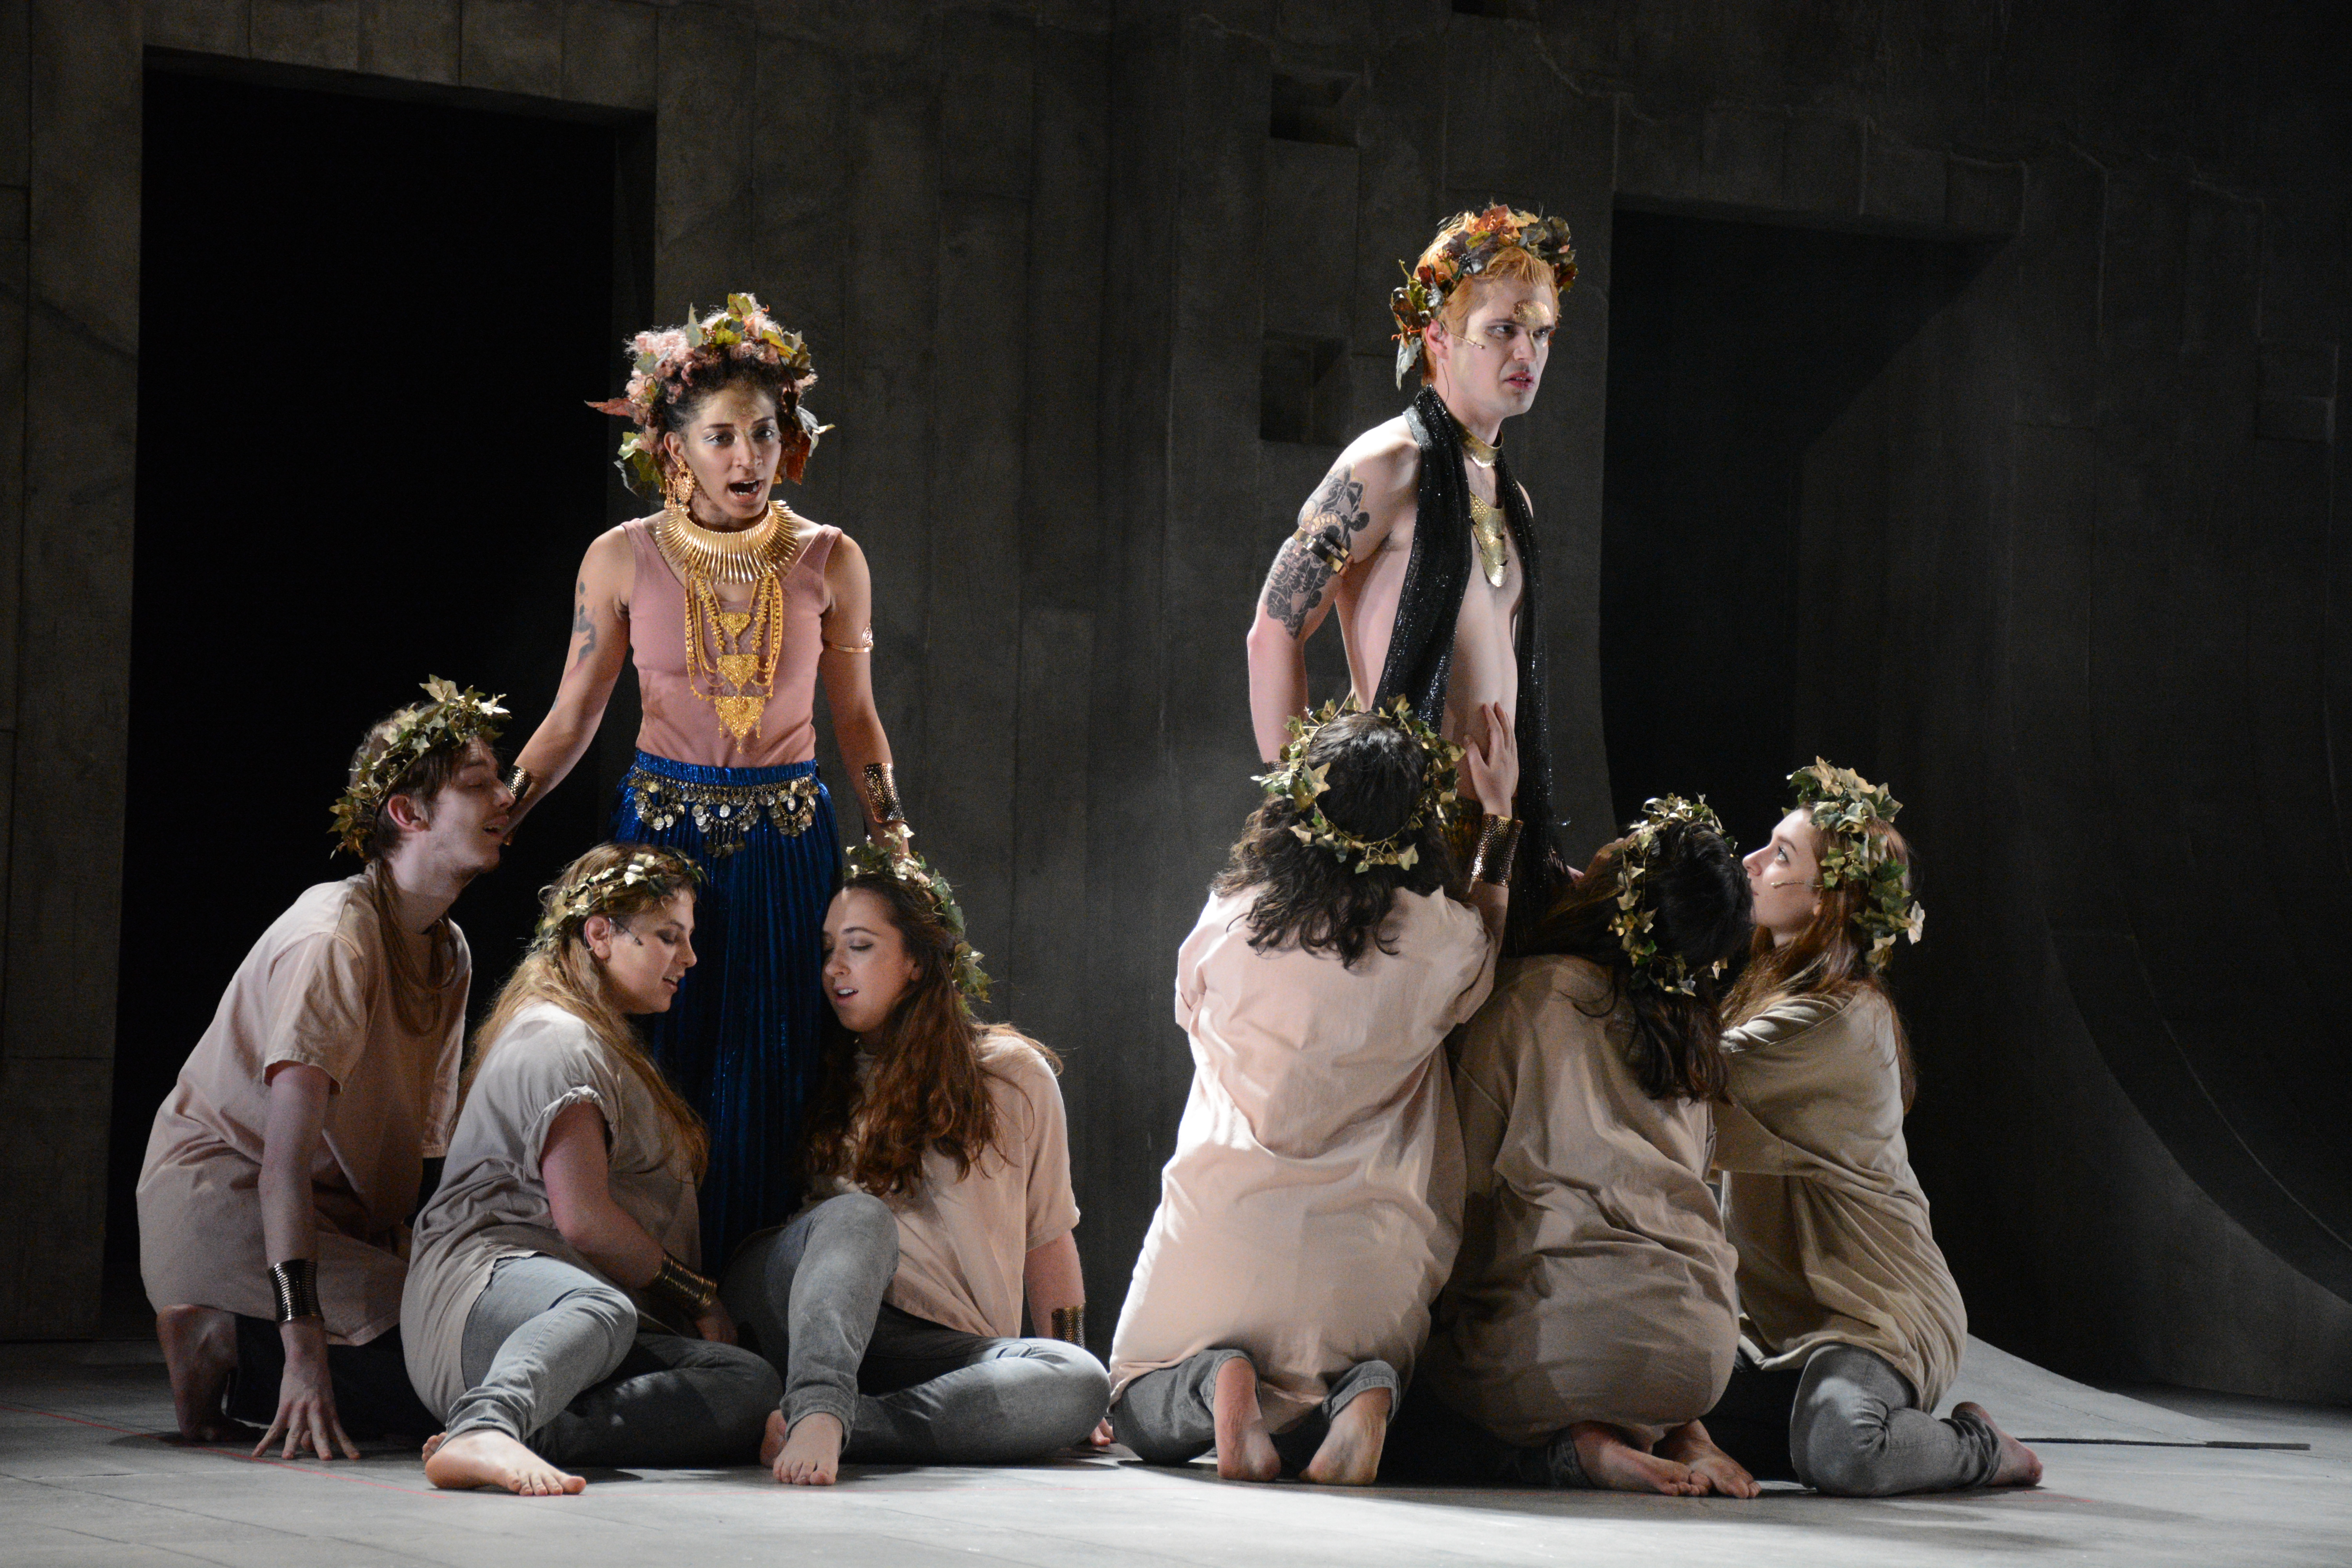 euripides the bacchae and other plays